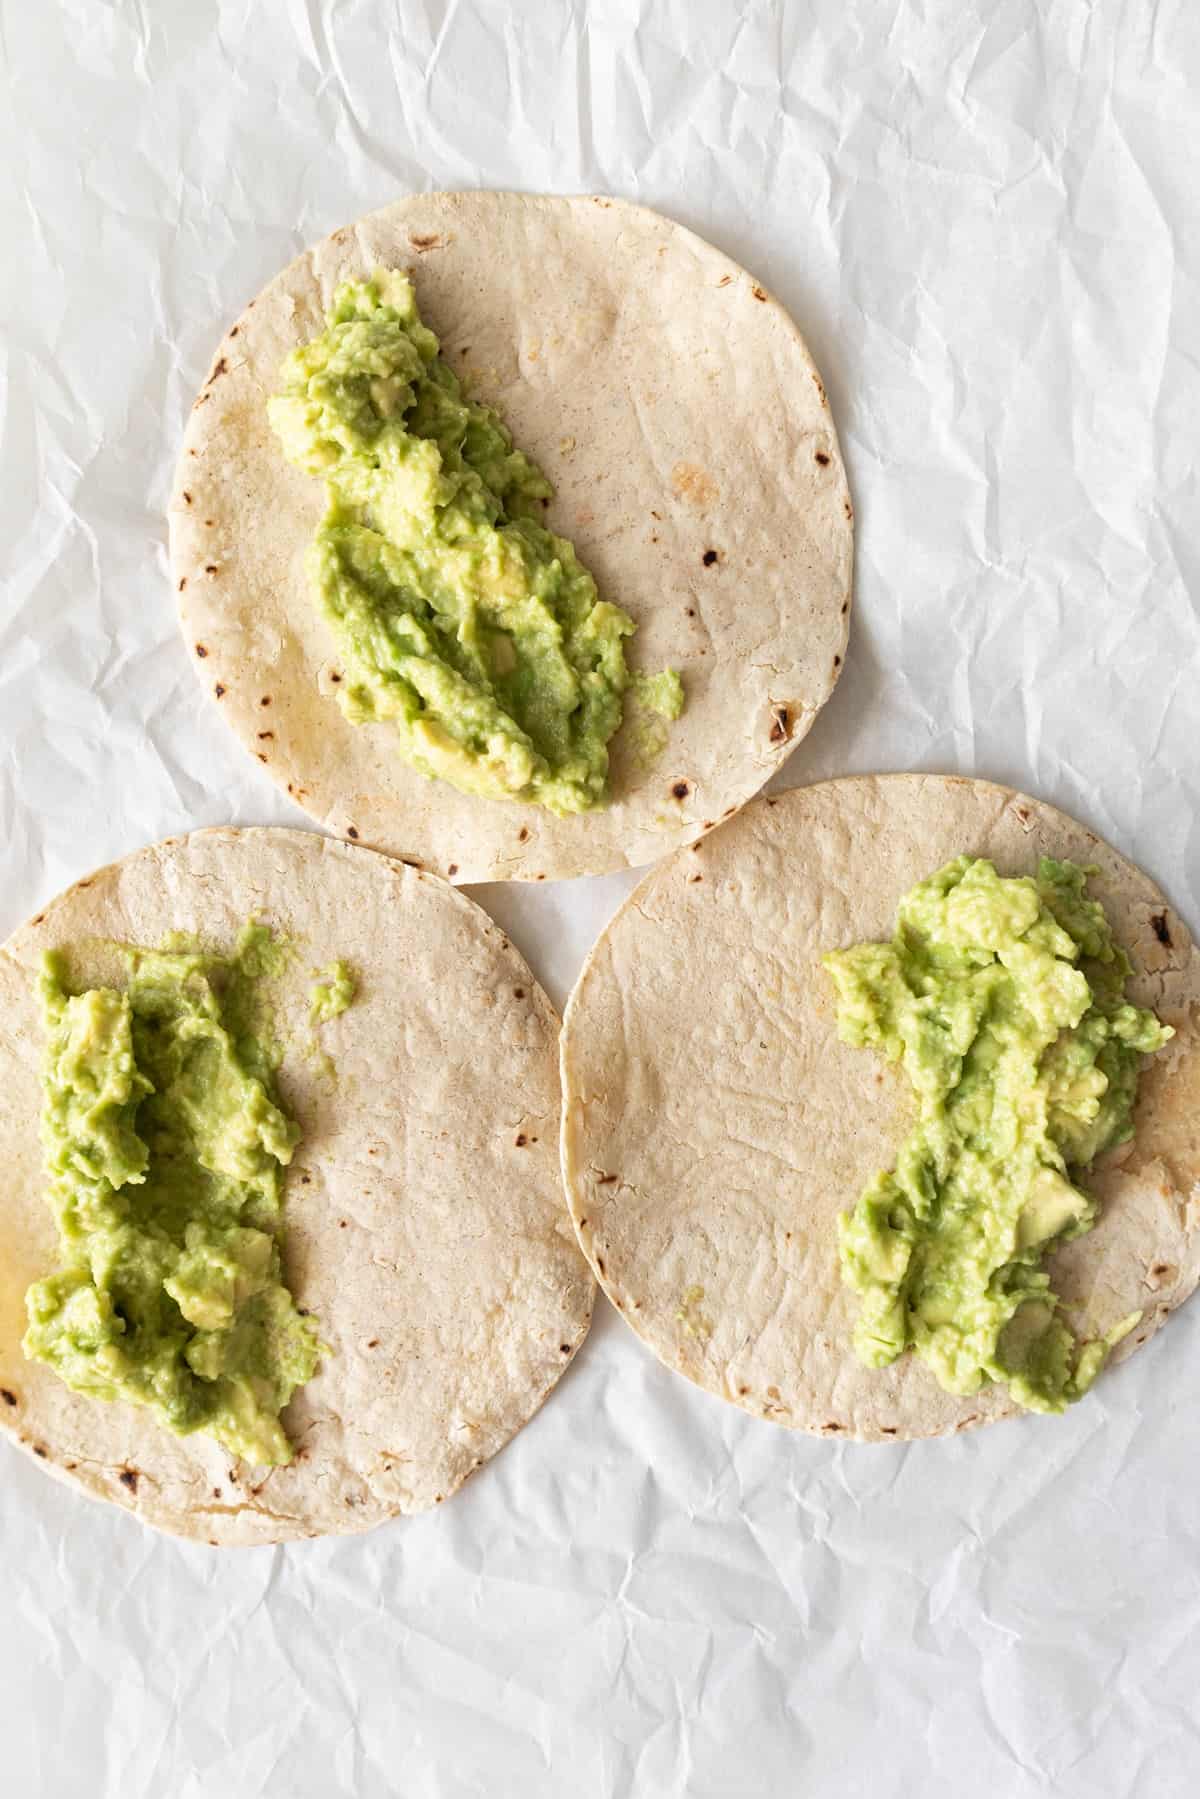 heated tortillas with avo mash on top